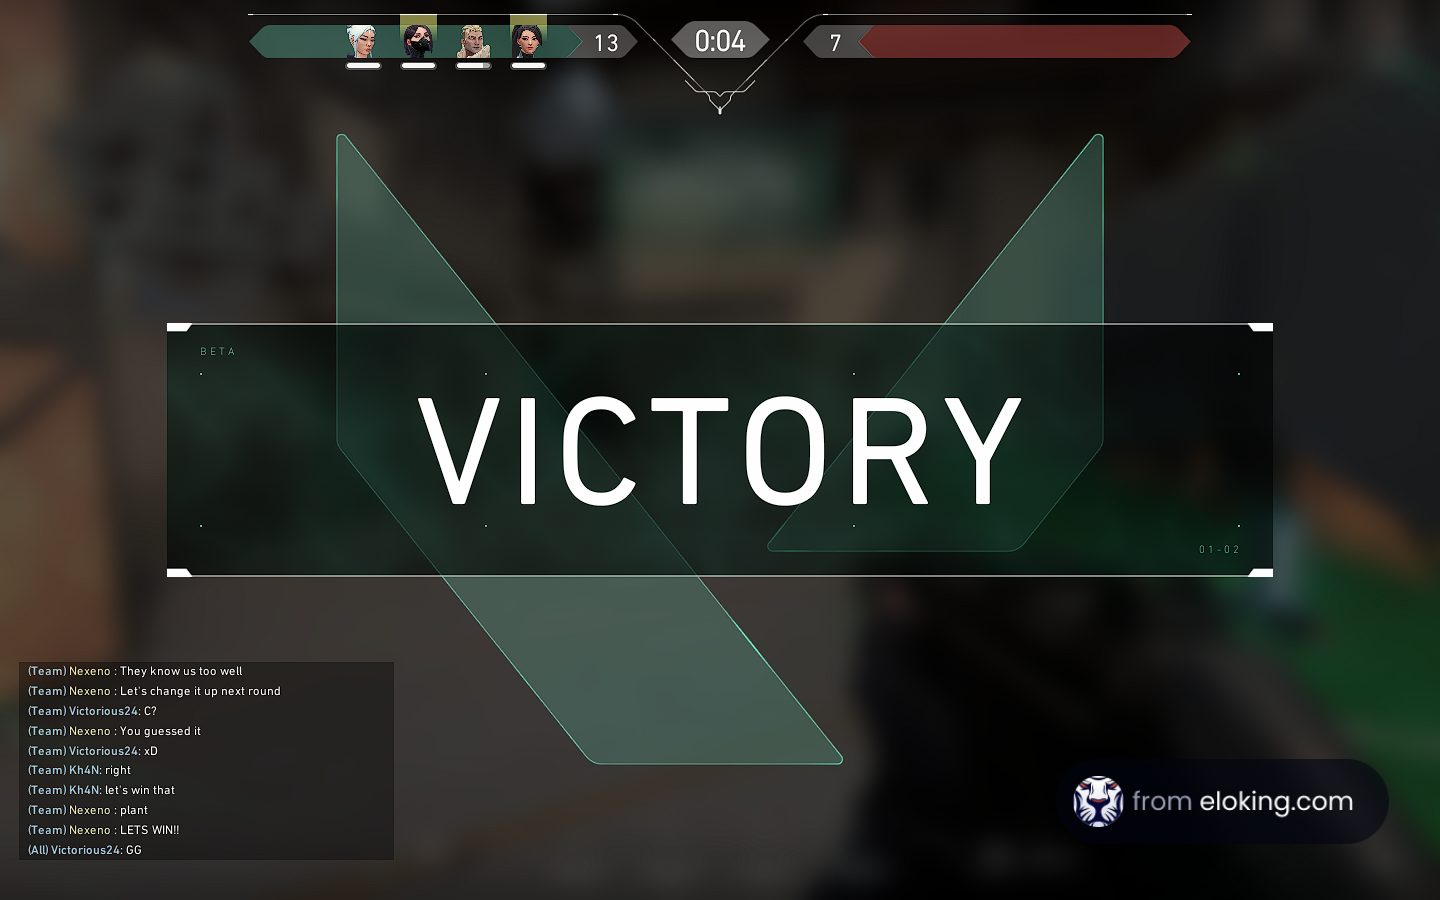 Online game victory screen showing the winning team